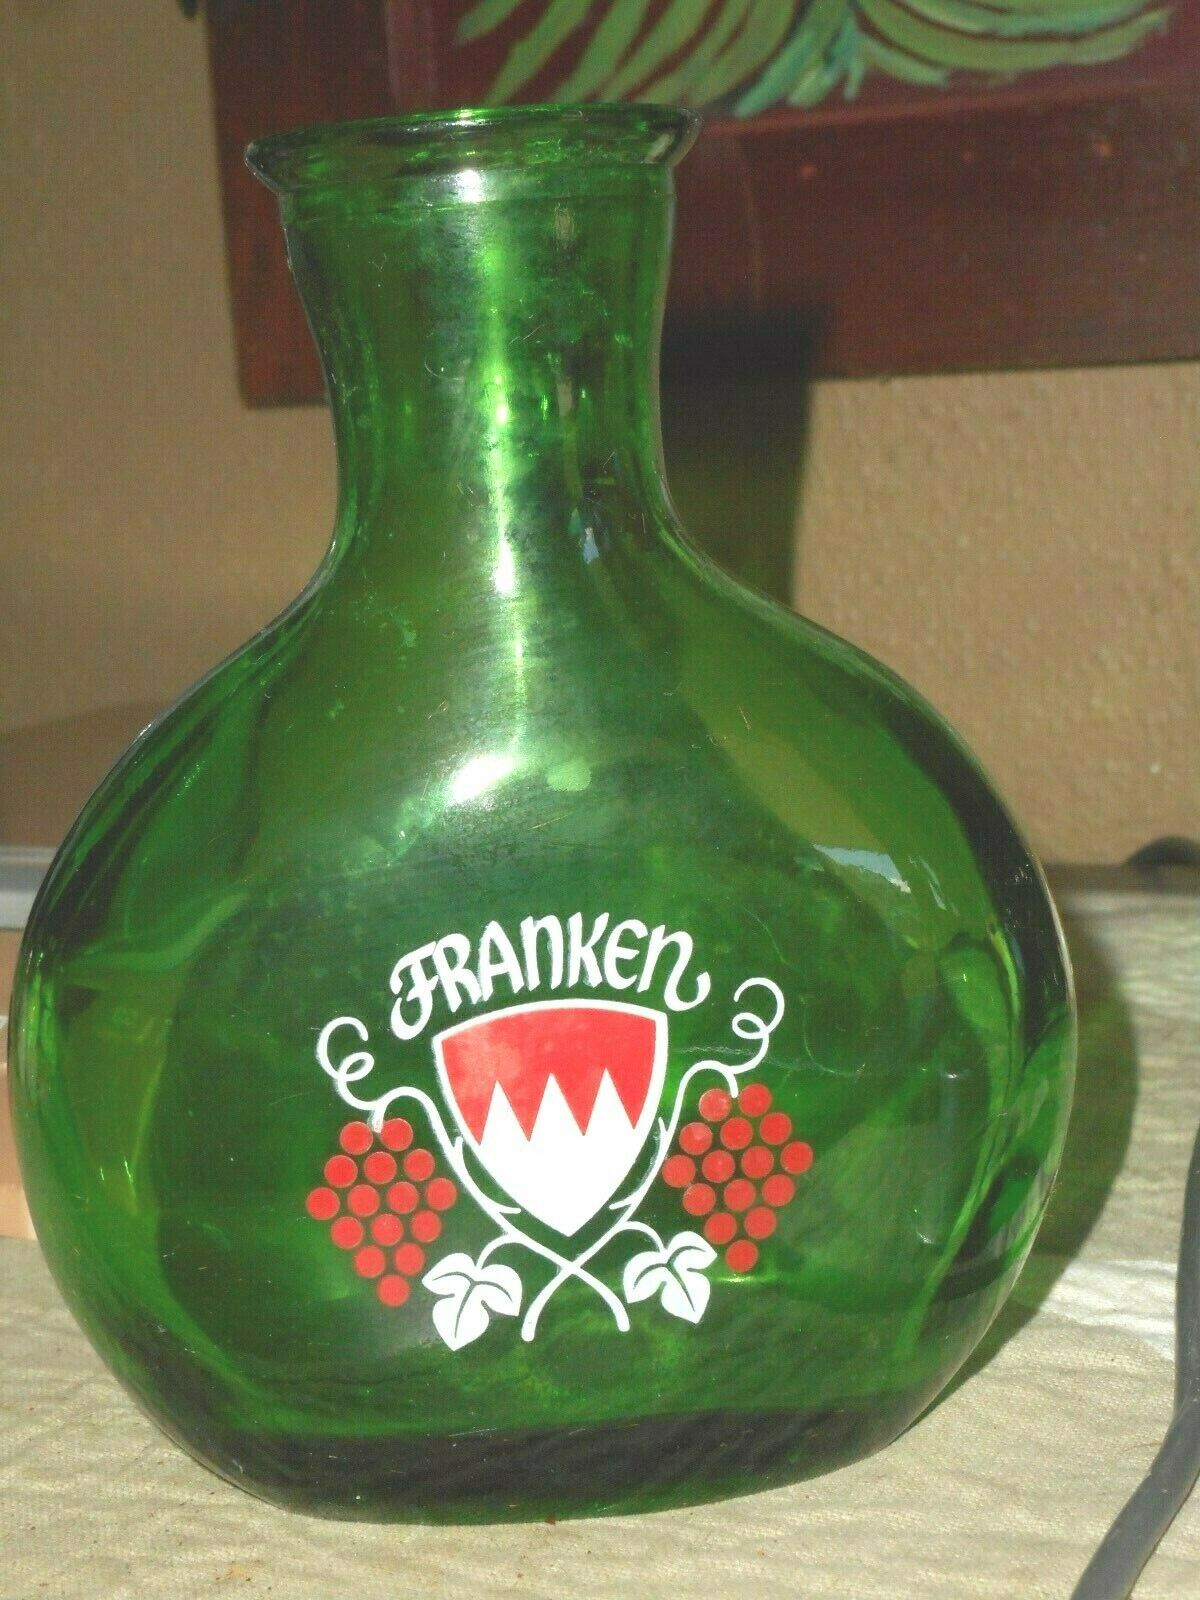 FRANKEN Green GLASS GERMAN WINE BOTTLE GRAPES AND LOGO Germany GREAT CONDITION - $12.99